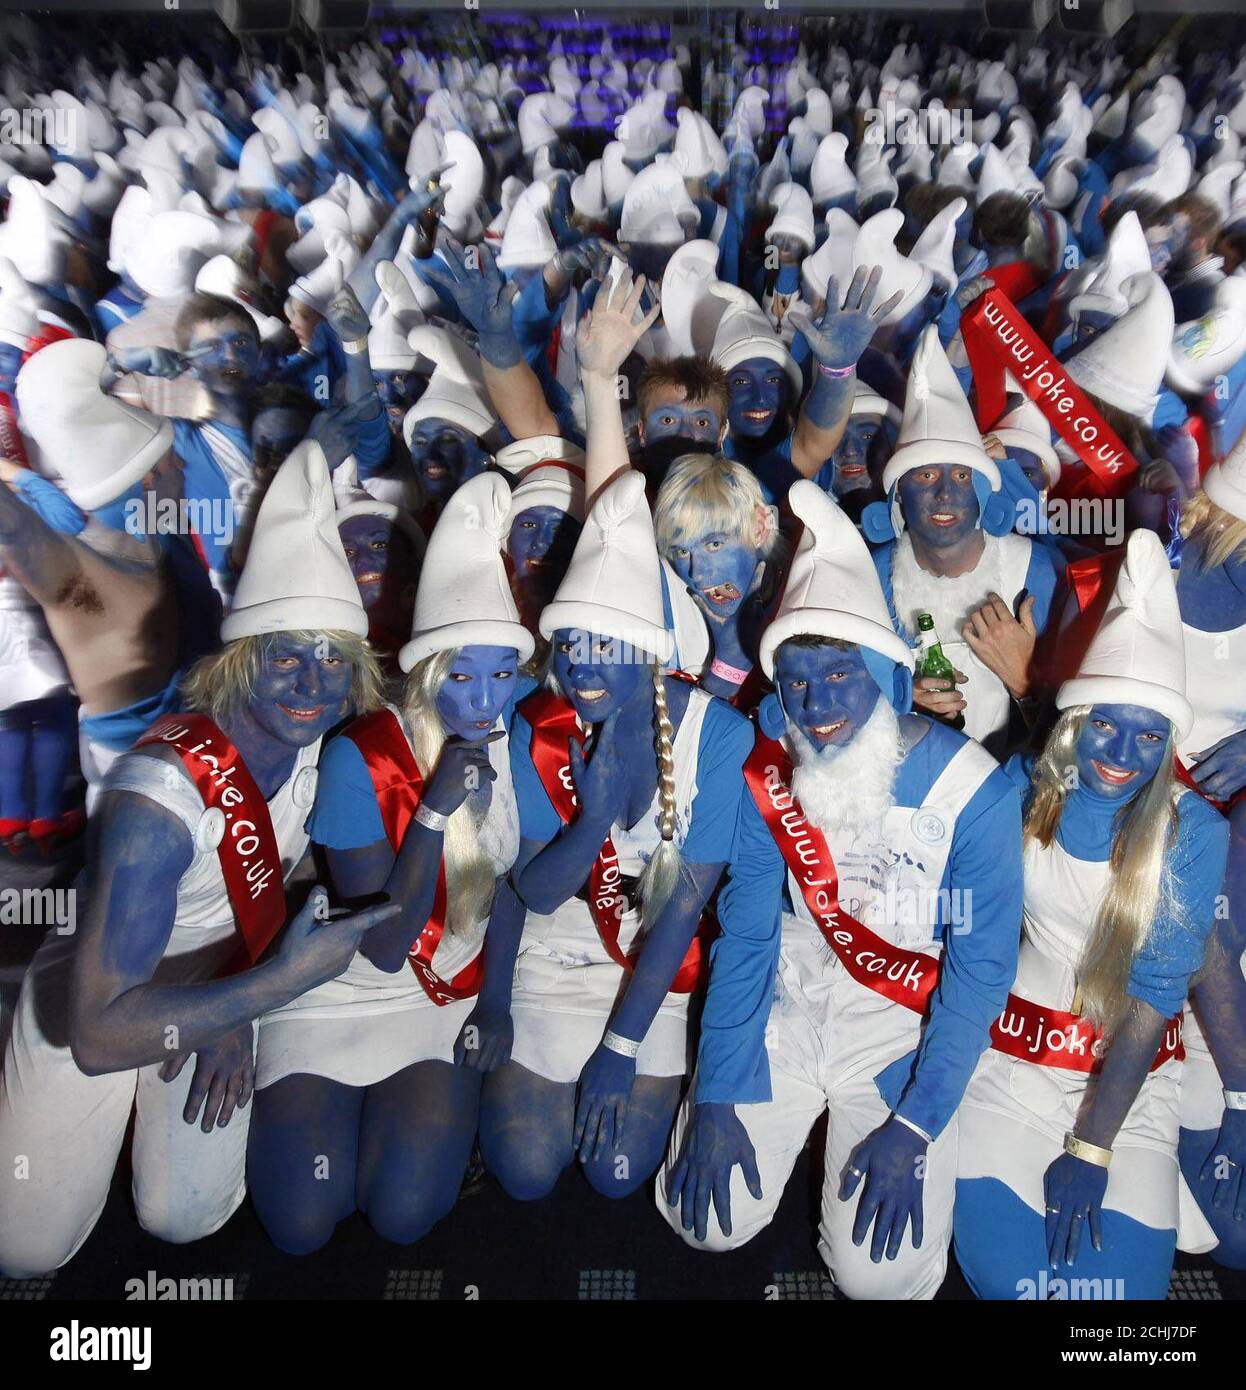 The scene in the Oceana nightclub in Swansea where 2,510 people, the majority of whom were students from the local university, gathered to smash the world record for the largest number of people dressed as Smurfs. Stock Photo